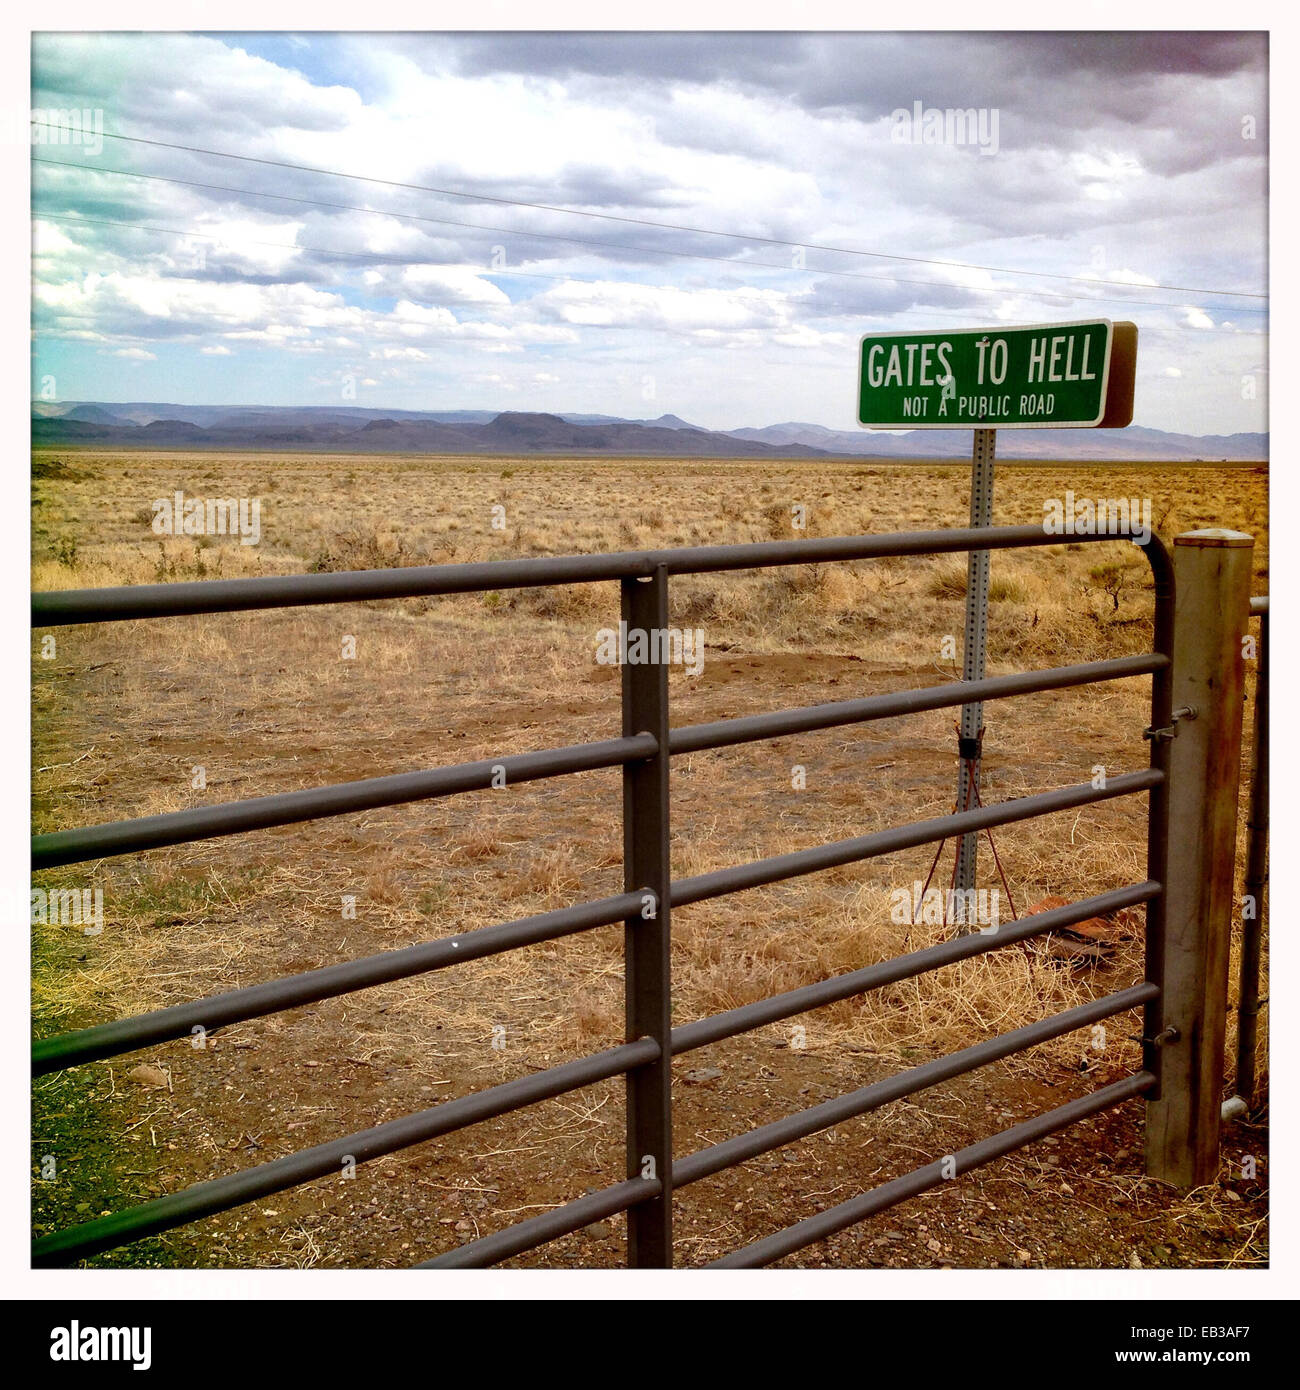 Sign for Gates to Hell in remote landscape Stock Photo